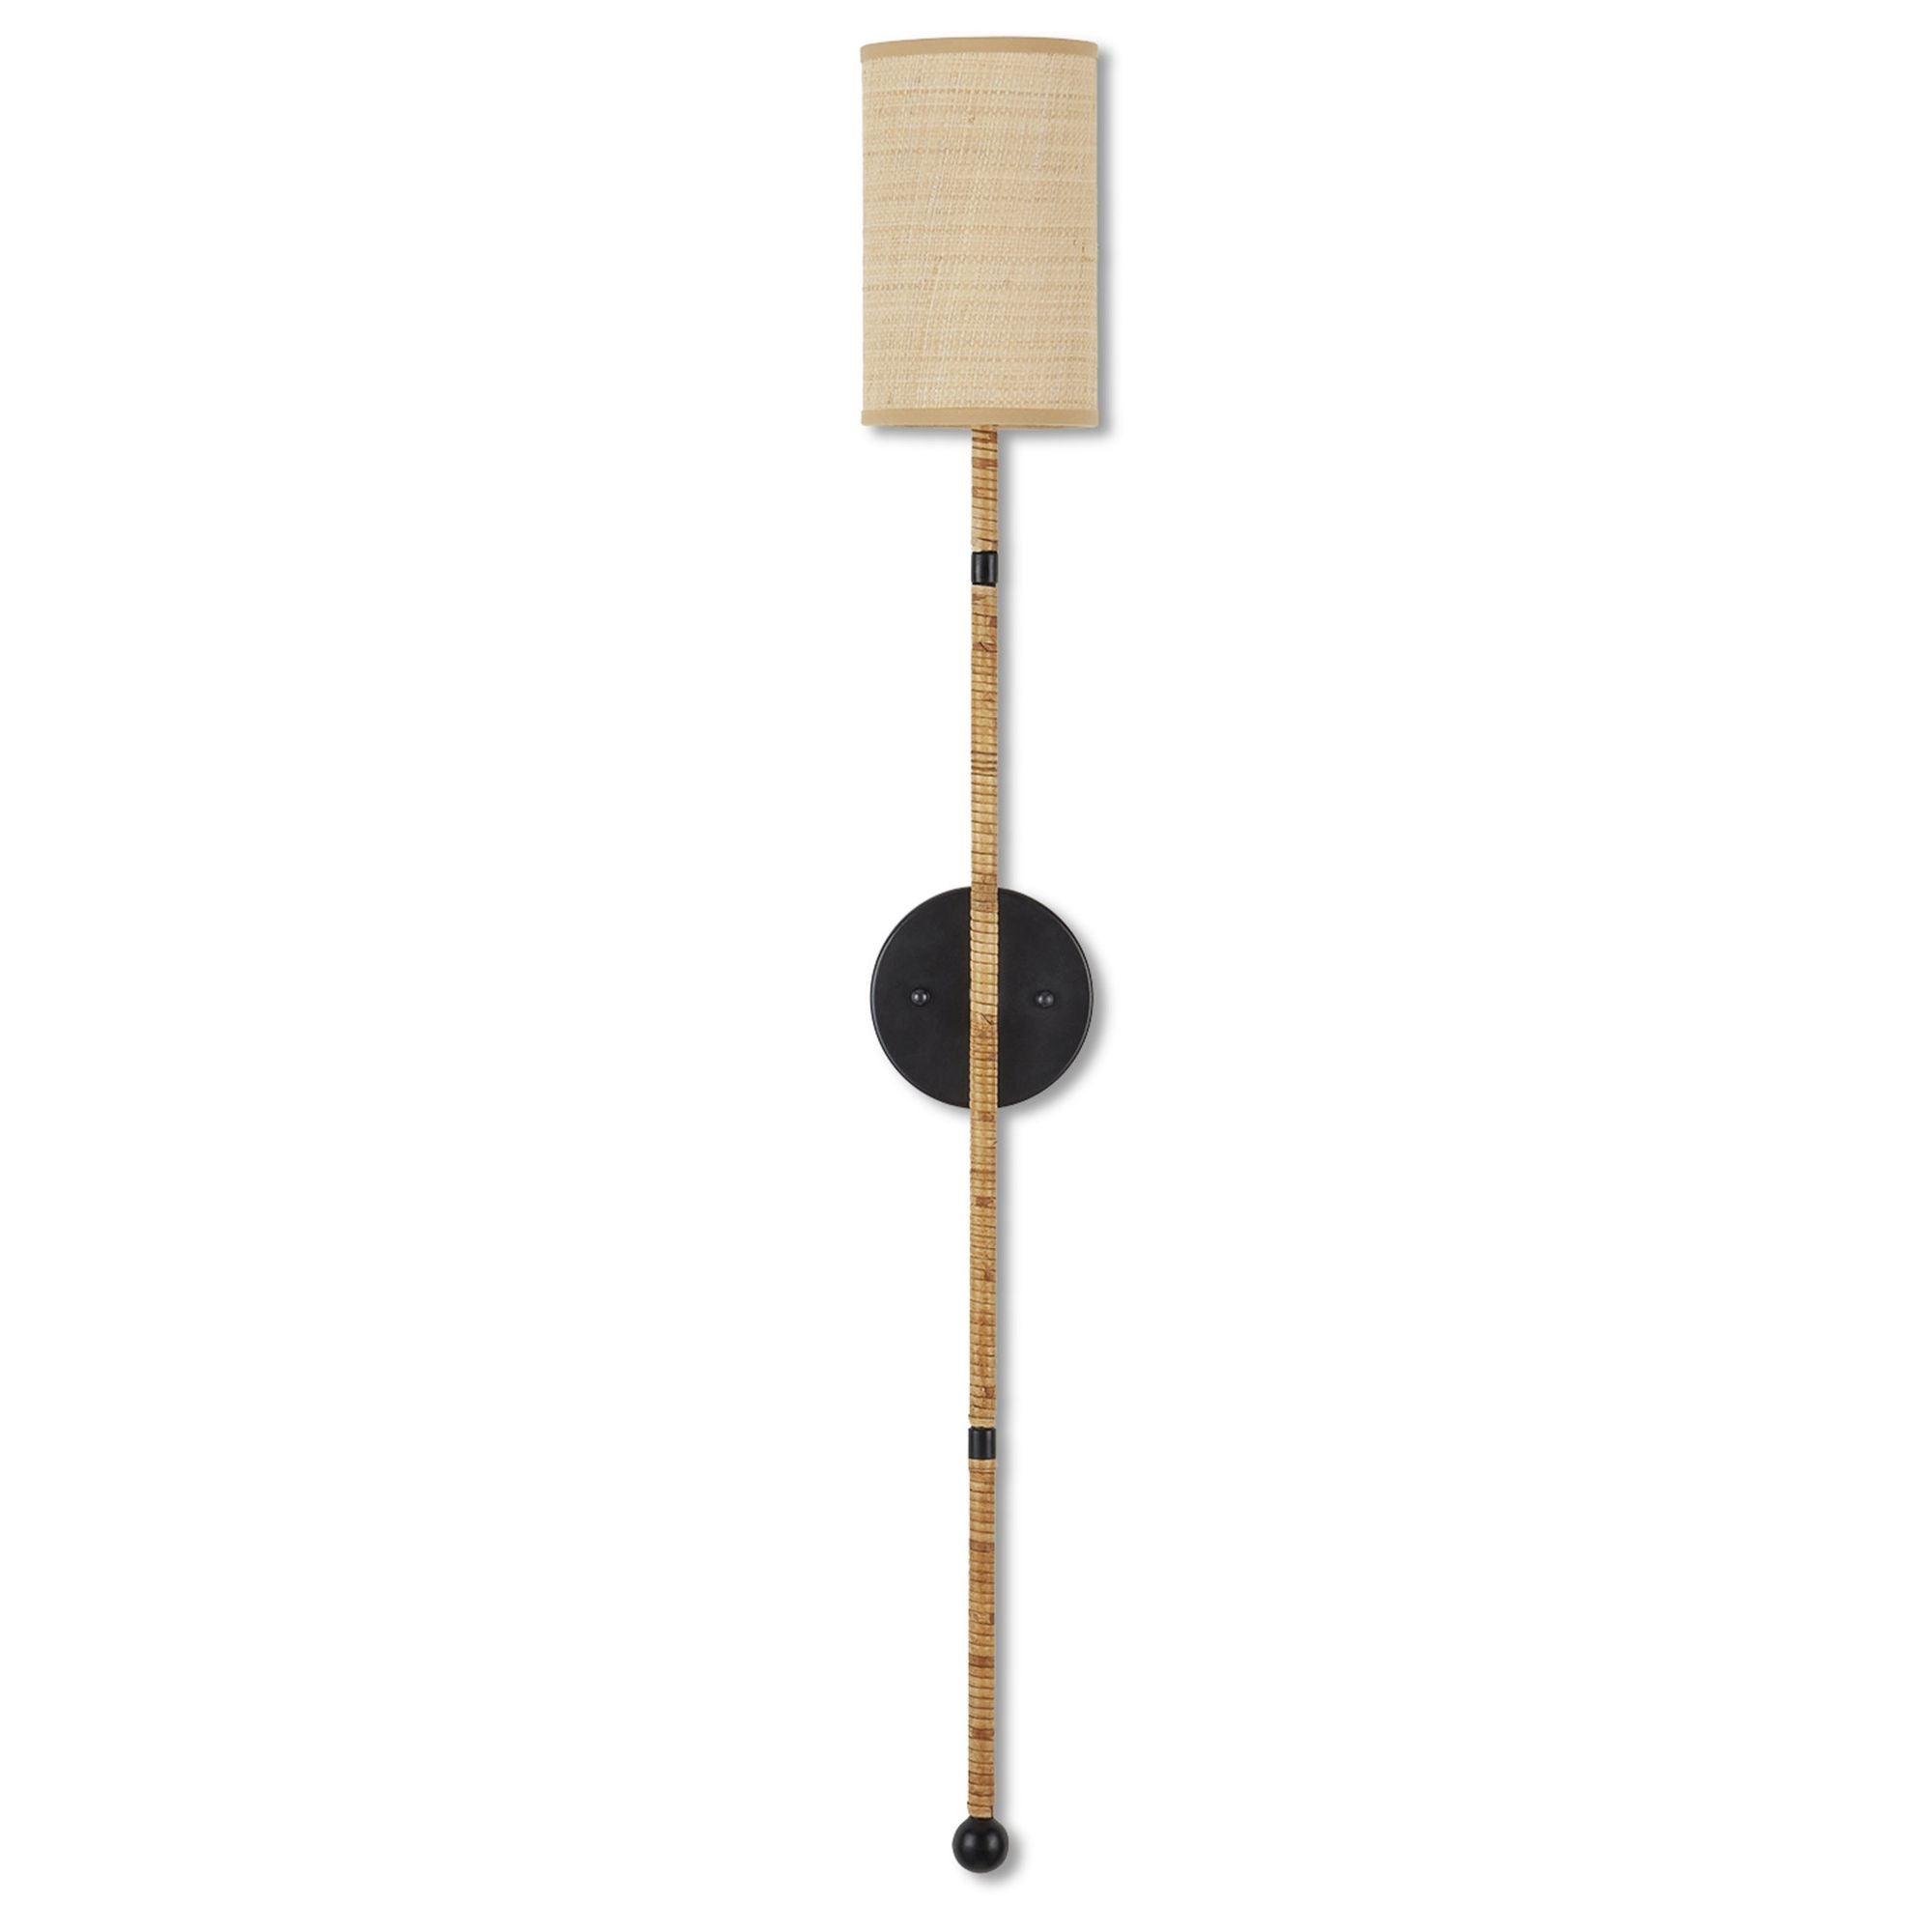 Capriole Rattan Wall Sconce - Natural/Satin Black